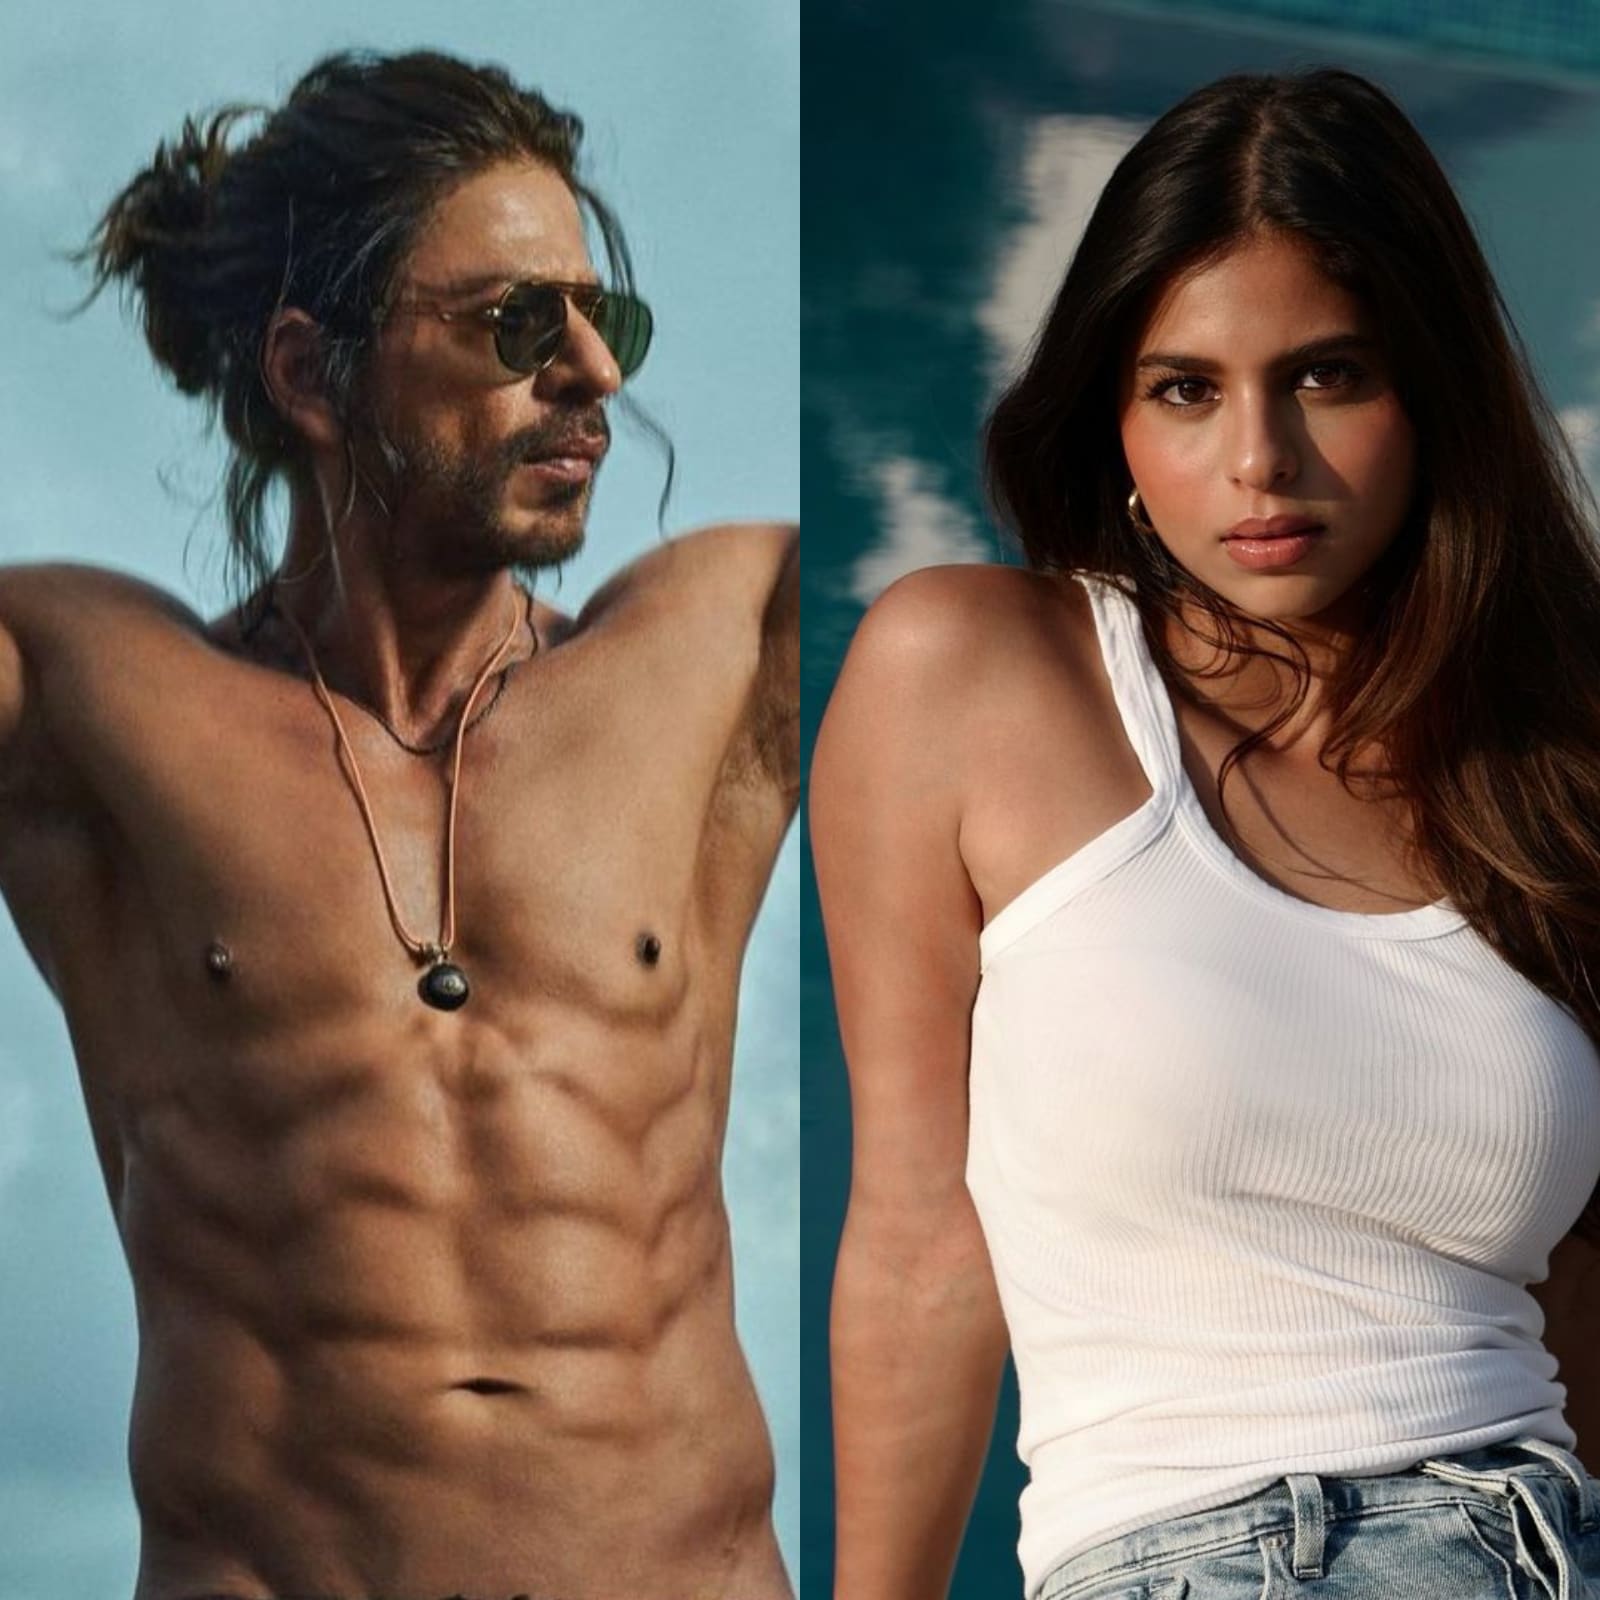 Suhana Khan In Awe Of Shah Rukh Khan's 8-Pack Abs: 'My Dad Is 56, We Aren't  Allowed Excuses' - News18